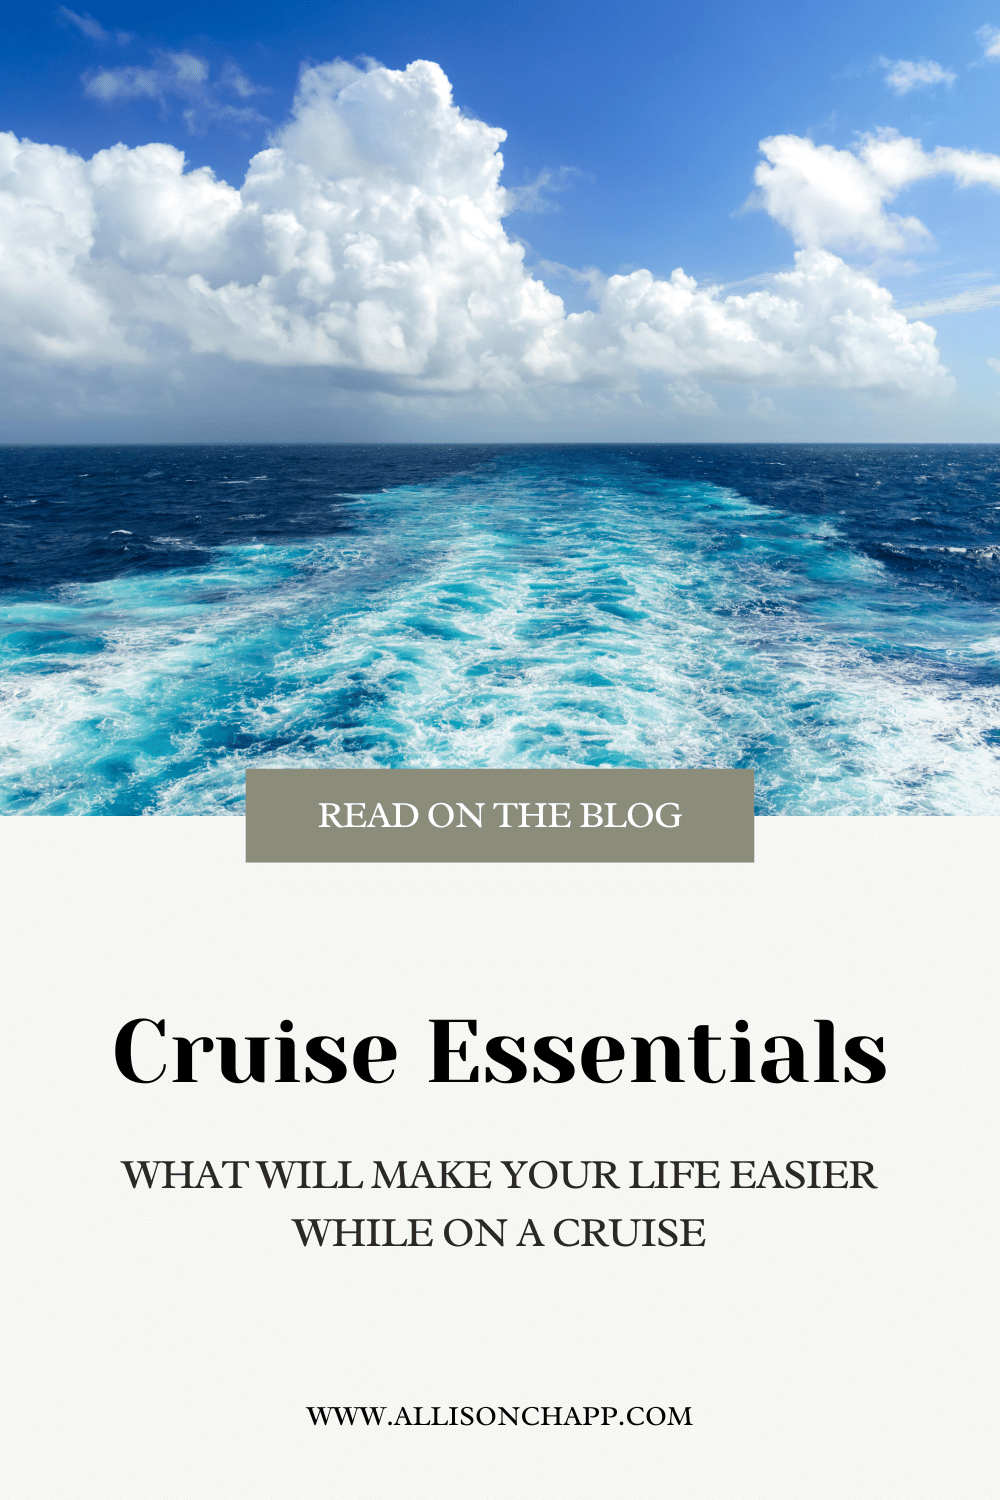 Cruise Essentials to Make Your Life Easier